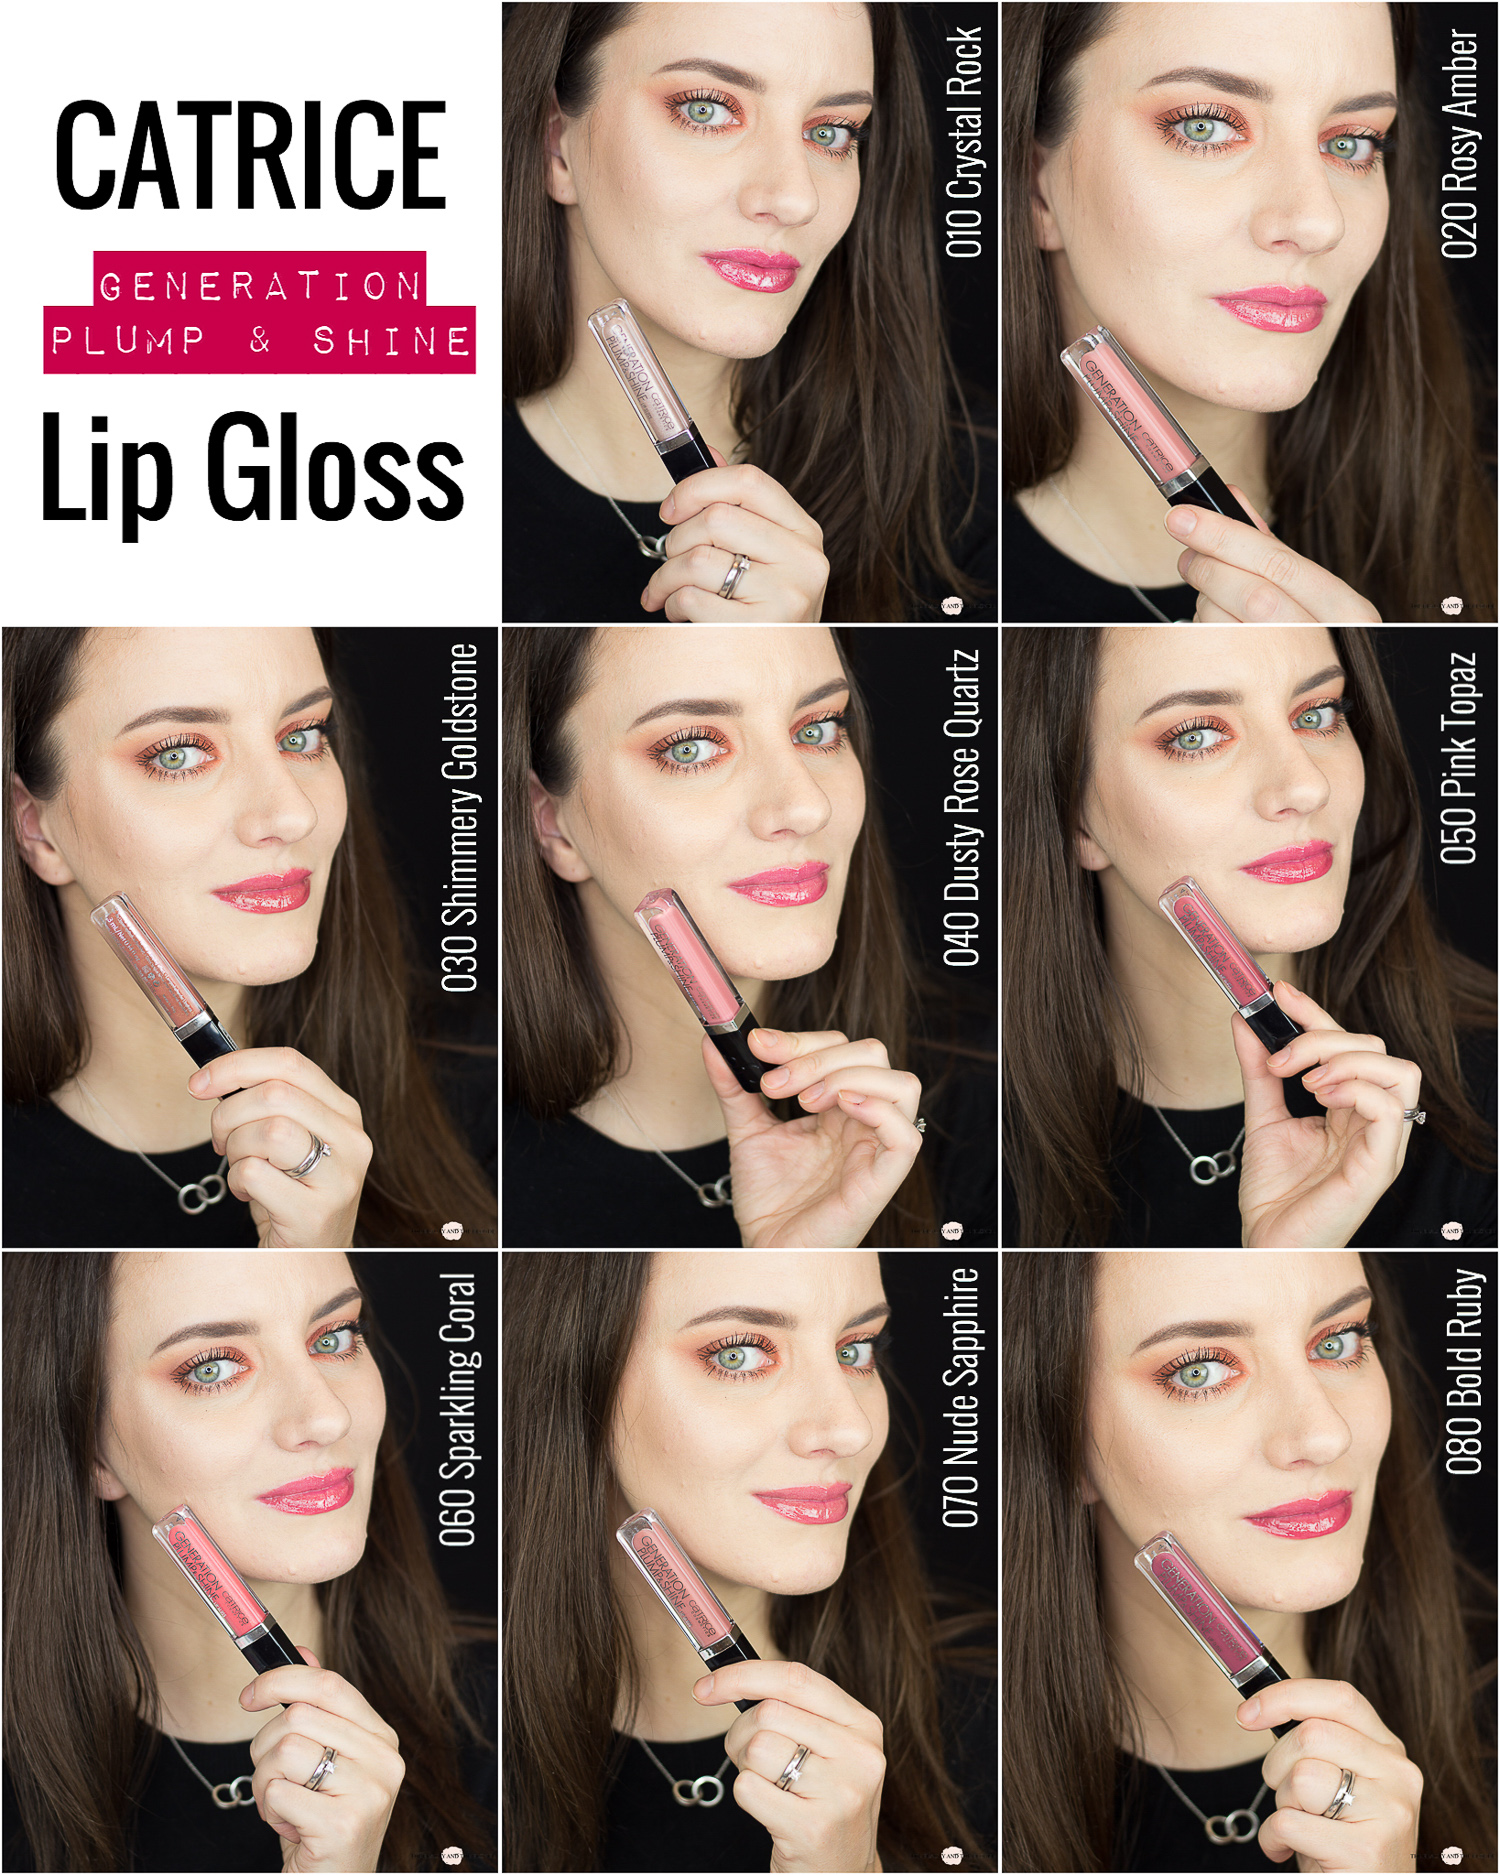 Catrice Generation Plump and Shine Lip Gloss Review Swatches Lipswatches